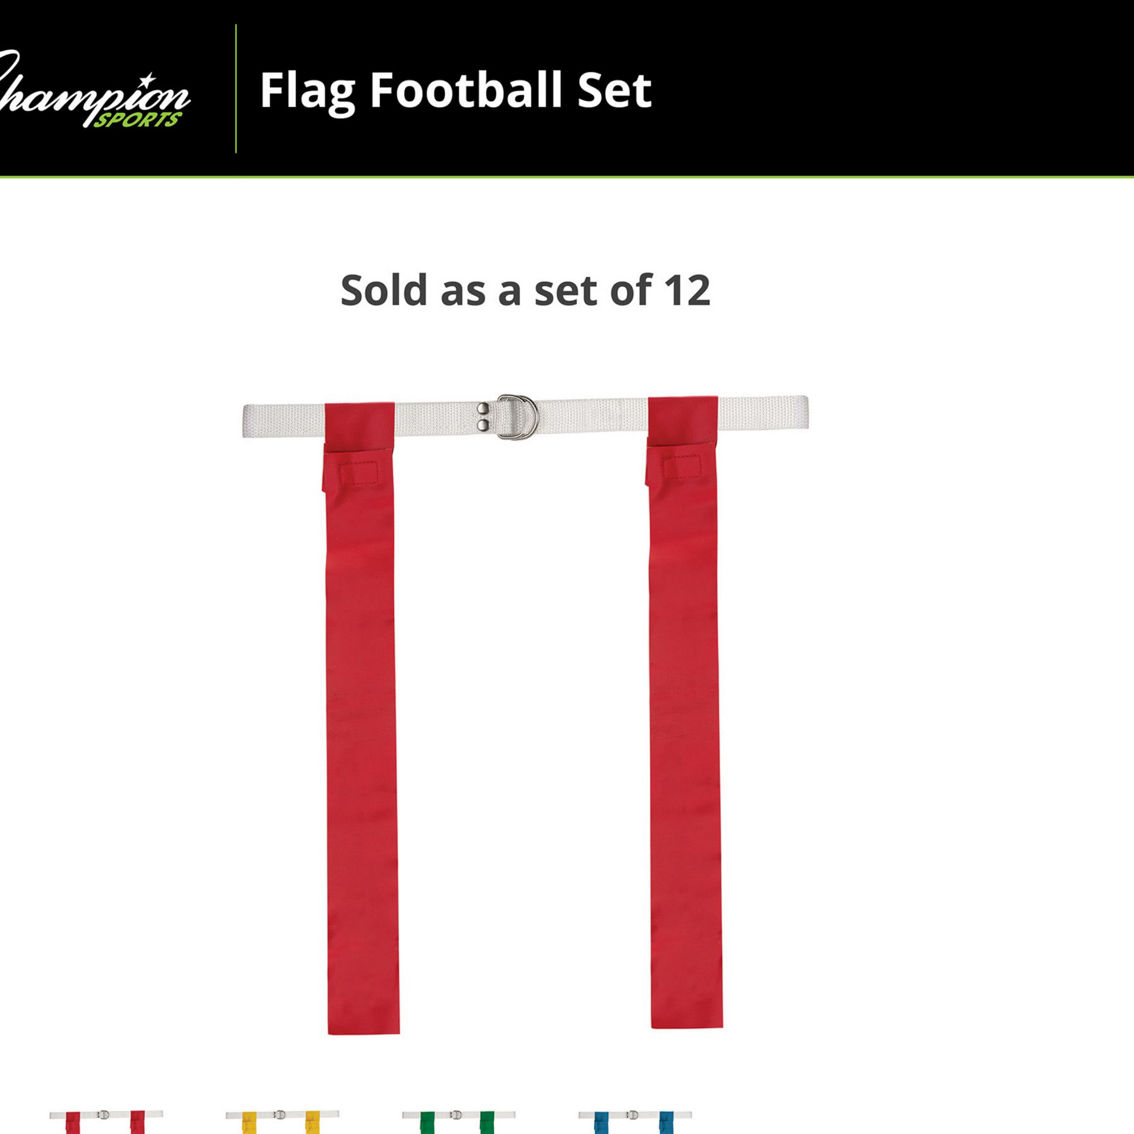 Champion Sports Flag Football Set, Red, Pack of 12 - Image 5 of 5